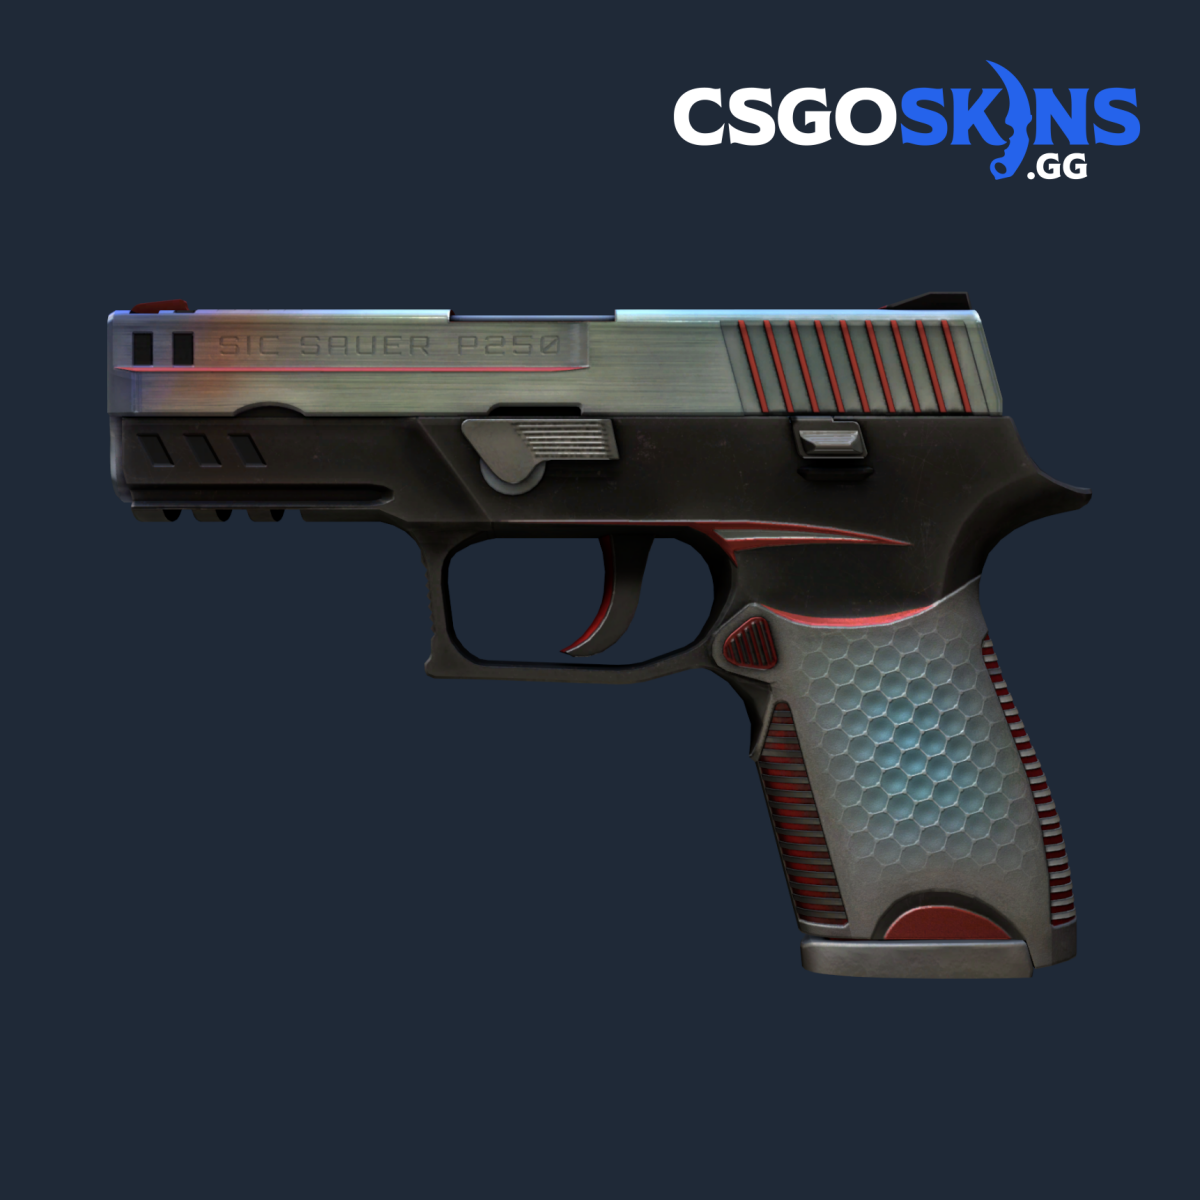 WAXPEER on X: 🔥 NEW CS:GO CASE IS OUT! 🔥 Prisma 2 Case has just been  added to the game, featuring 17 new skins, with the update which ended  Operation Shattered Web.